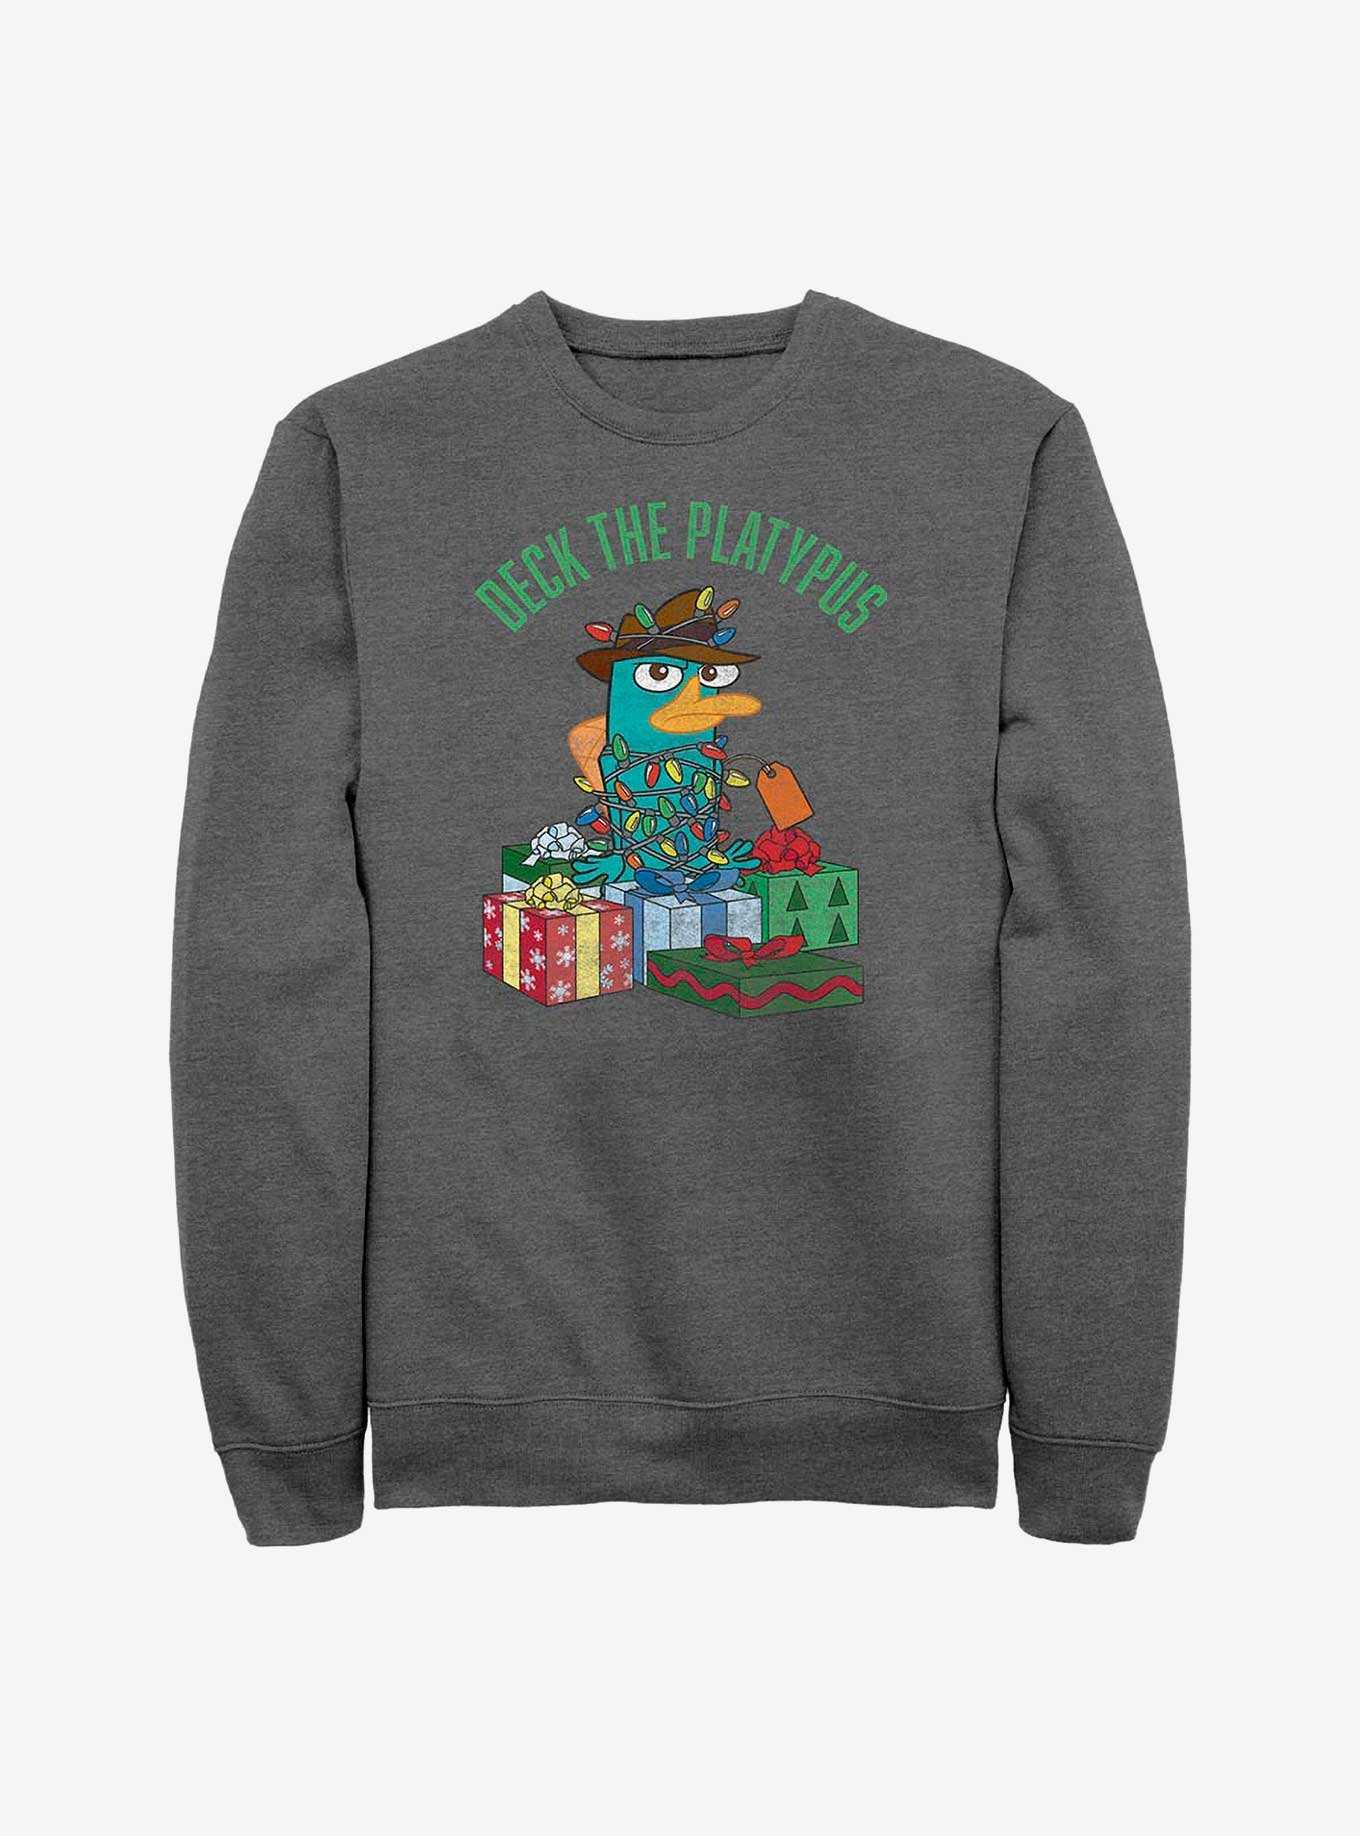 Disney Phineas And Ferb Wrapped Up Perry Crew Sweatshirt, , hi-res